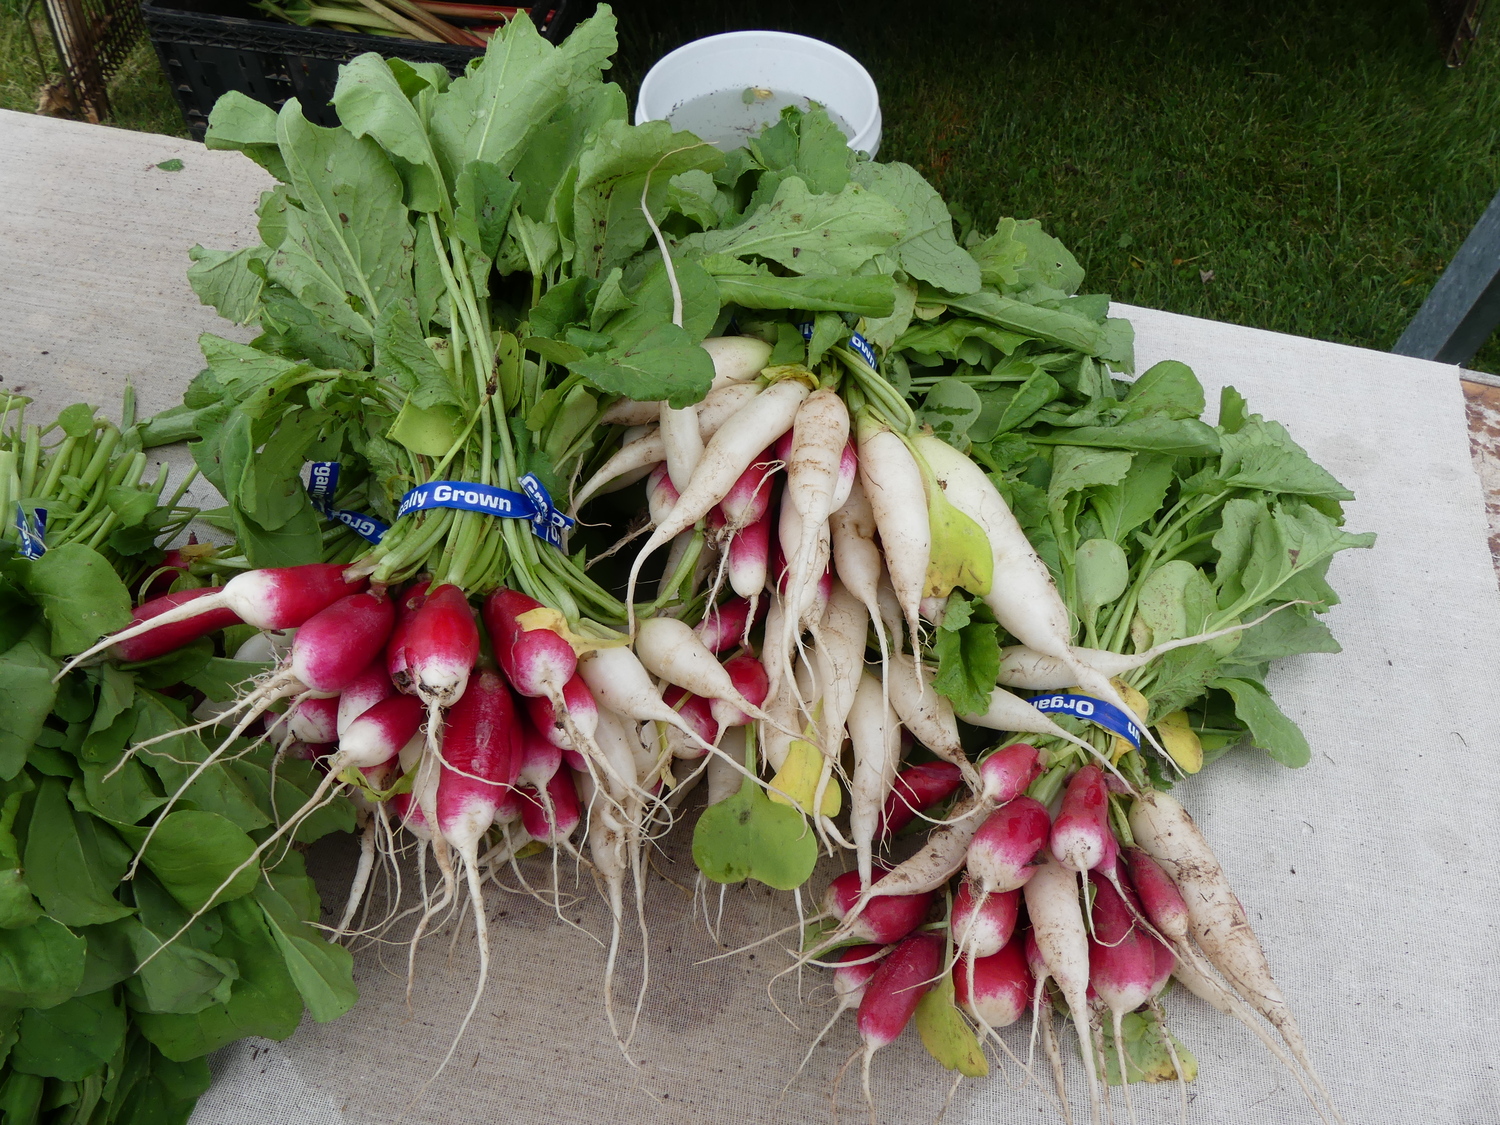 Breakfast-type radishes that you might see at farmers markets in May but you can easily grow them at home if you sow them now. These types tend to be quite mild.
ANDREW MESSINGER